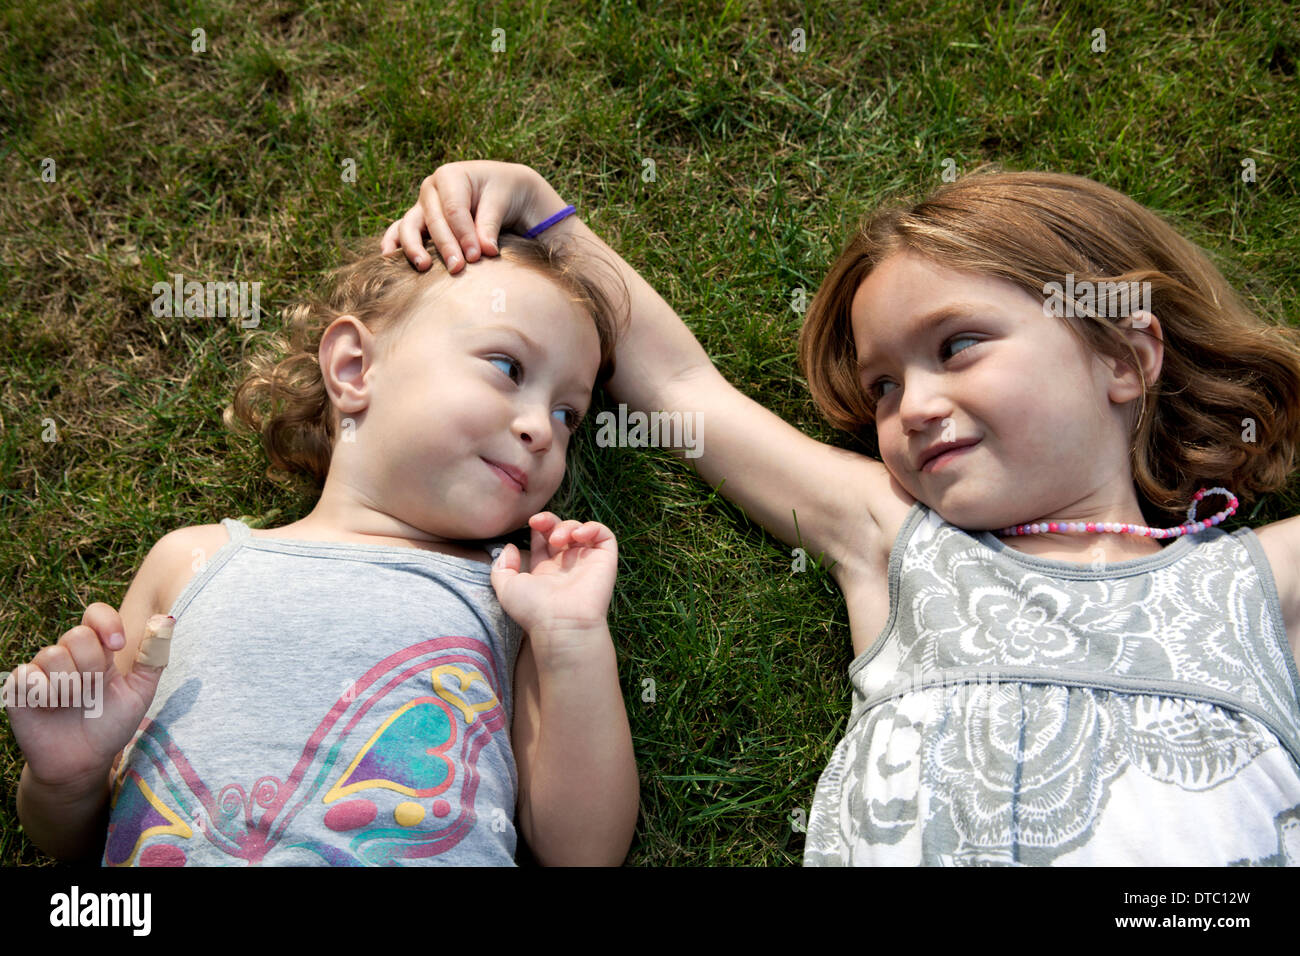 Portrait of two young sisters lying on grass Stock Photo